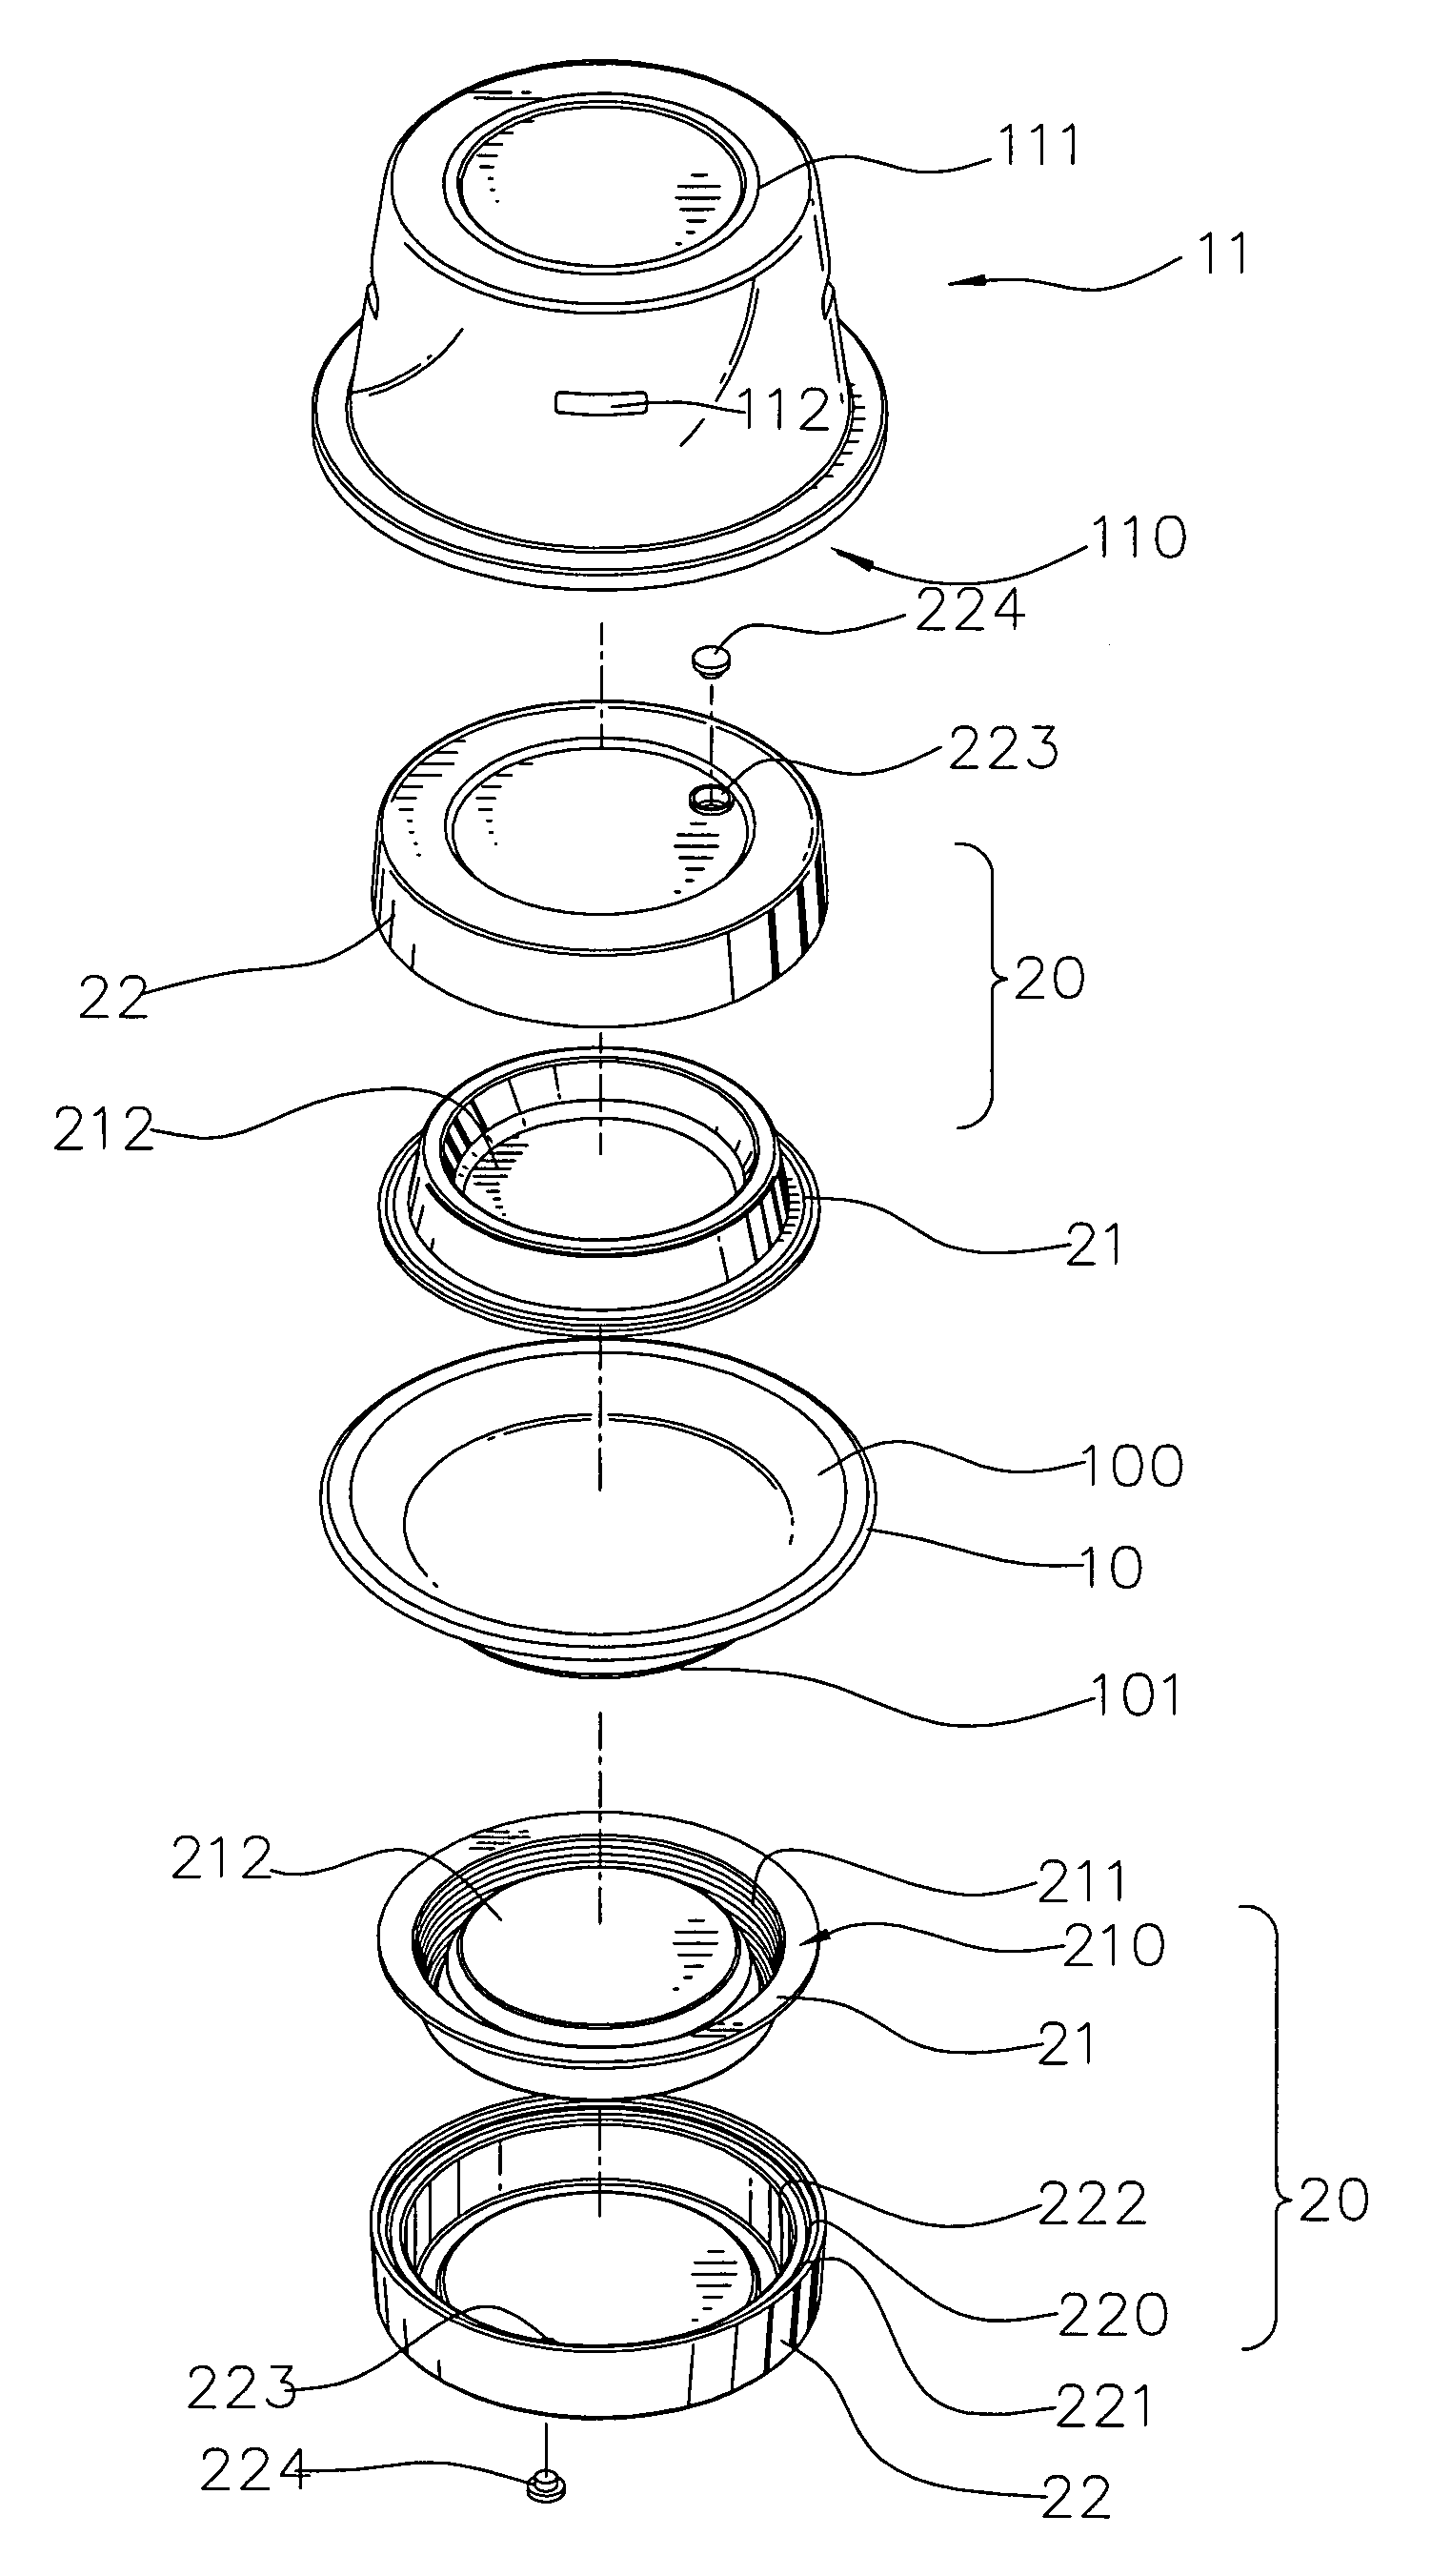 Portable heat exchanging device